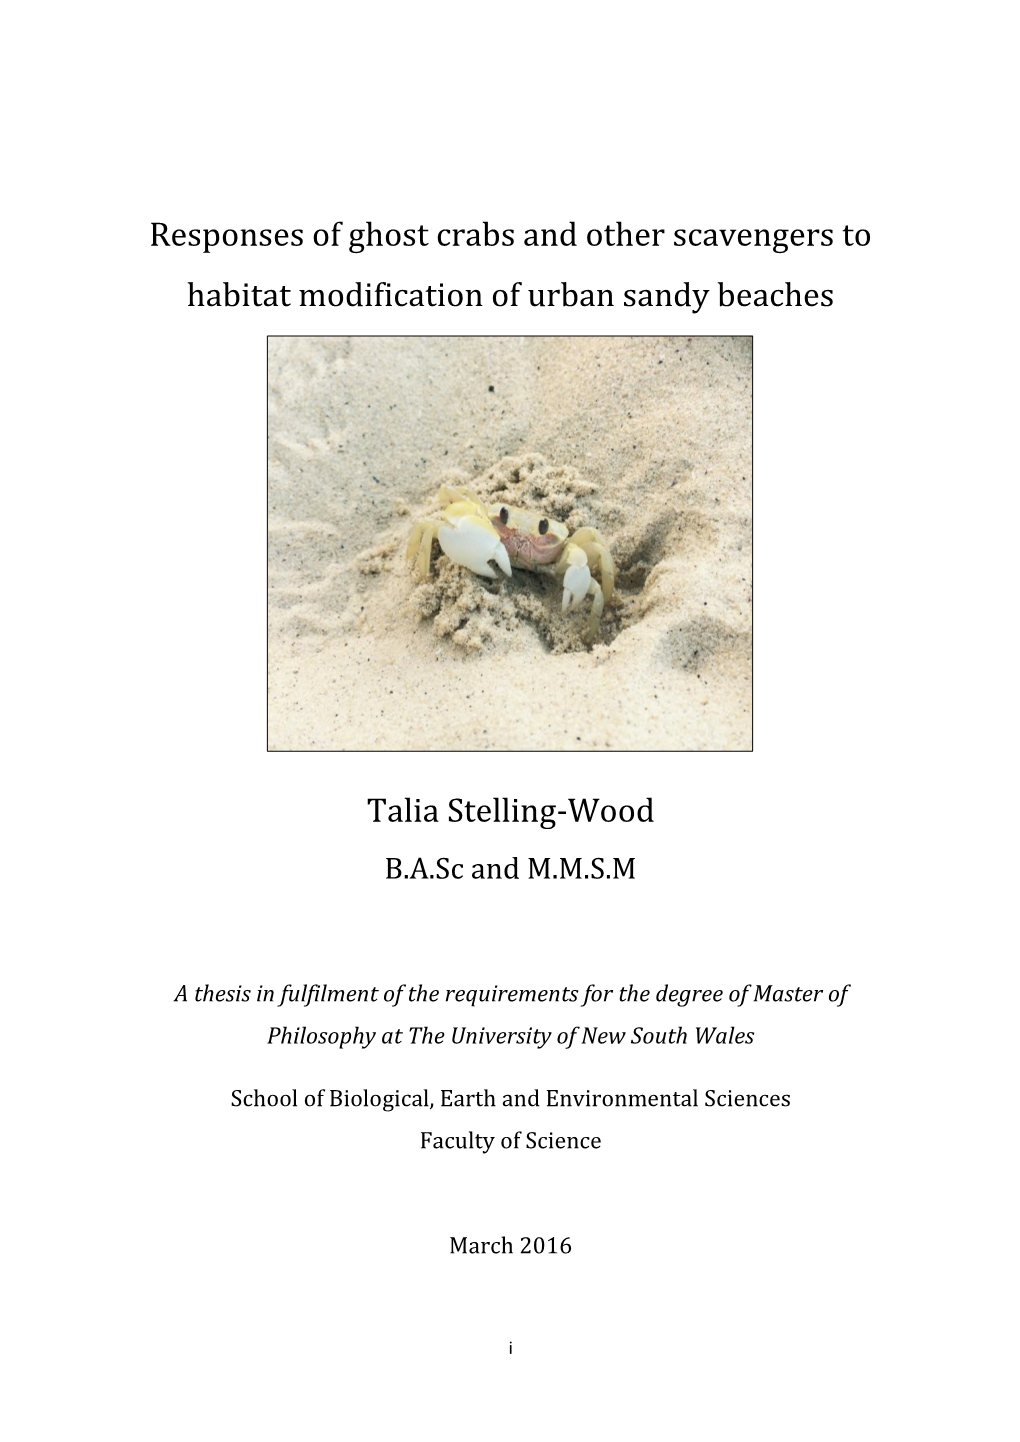 Responses of Ghost Crabs and Other Scavengers to Habitat Modification of Urban Sandy Beaches